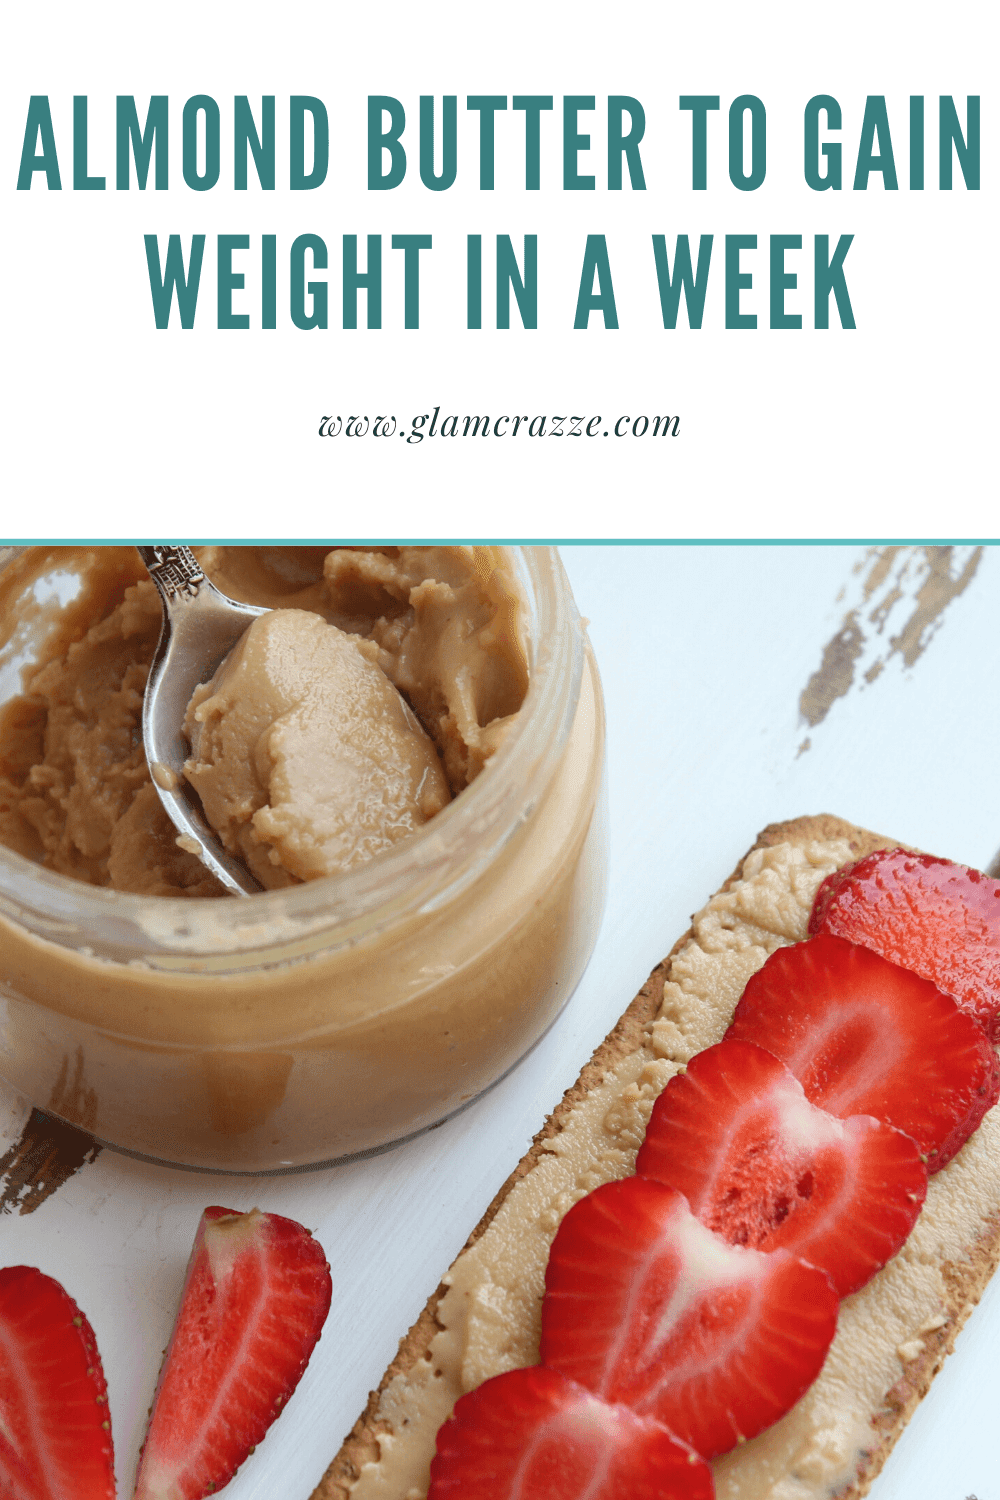 How to gain weight in a week while switching to Almond butter